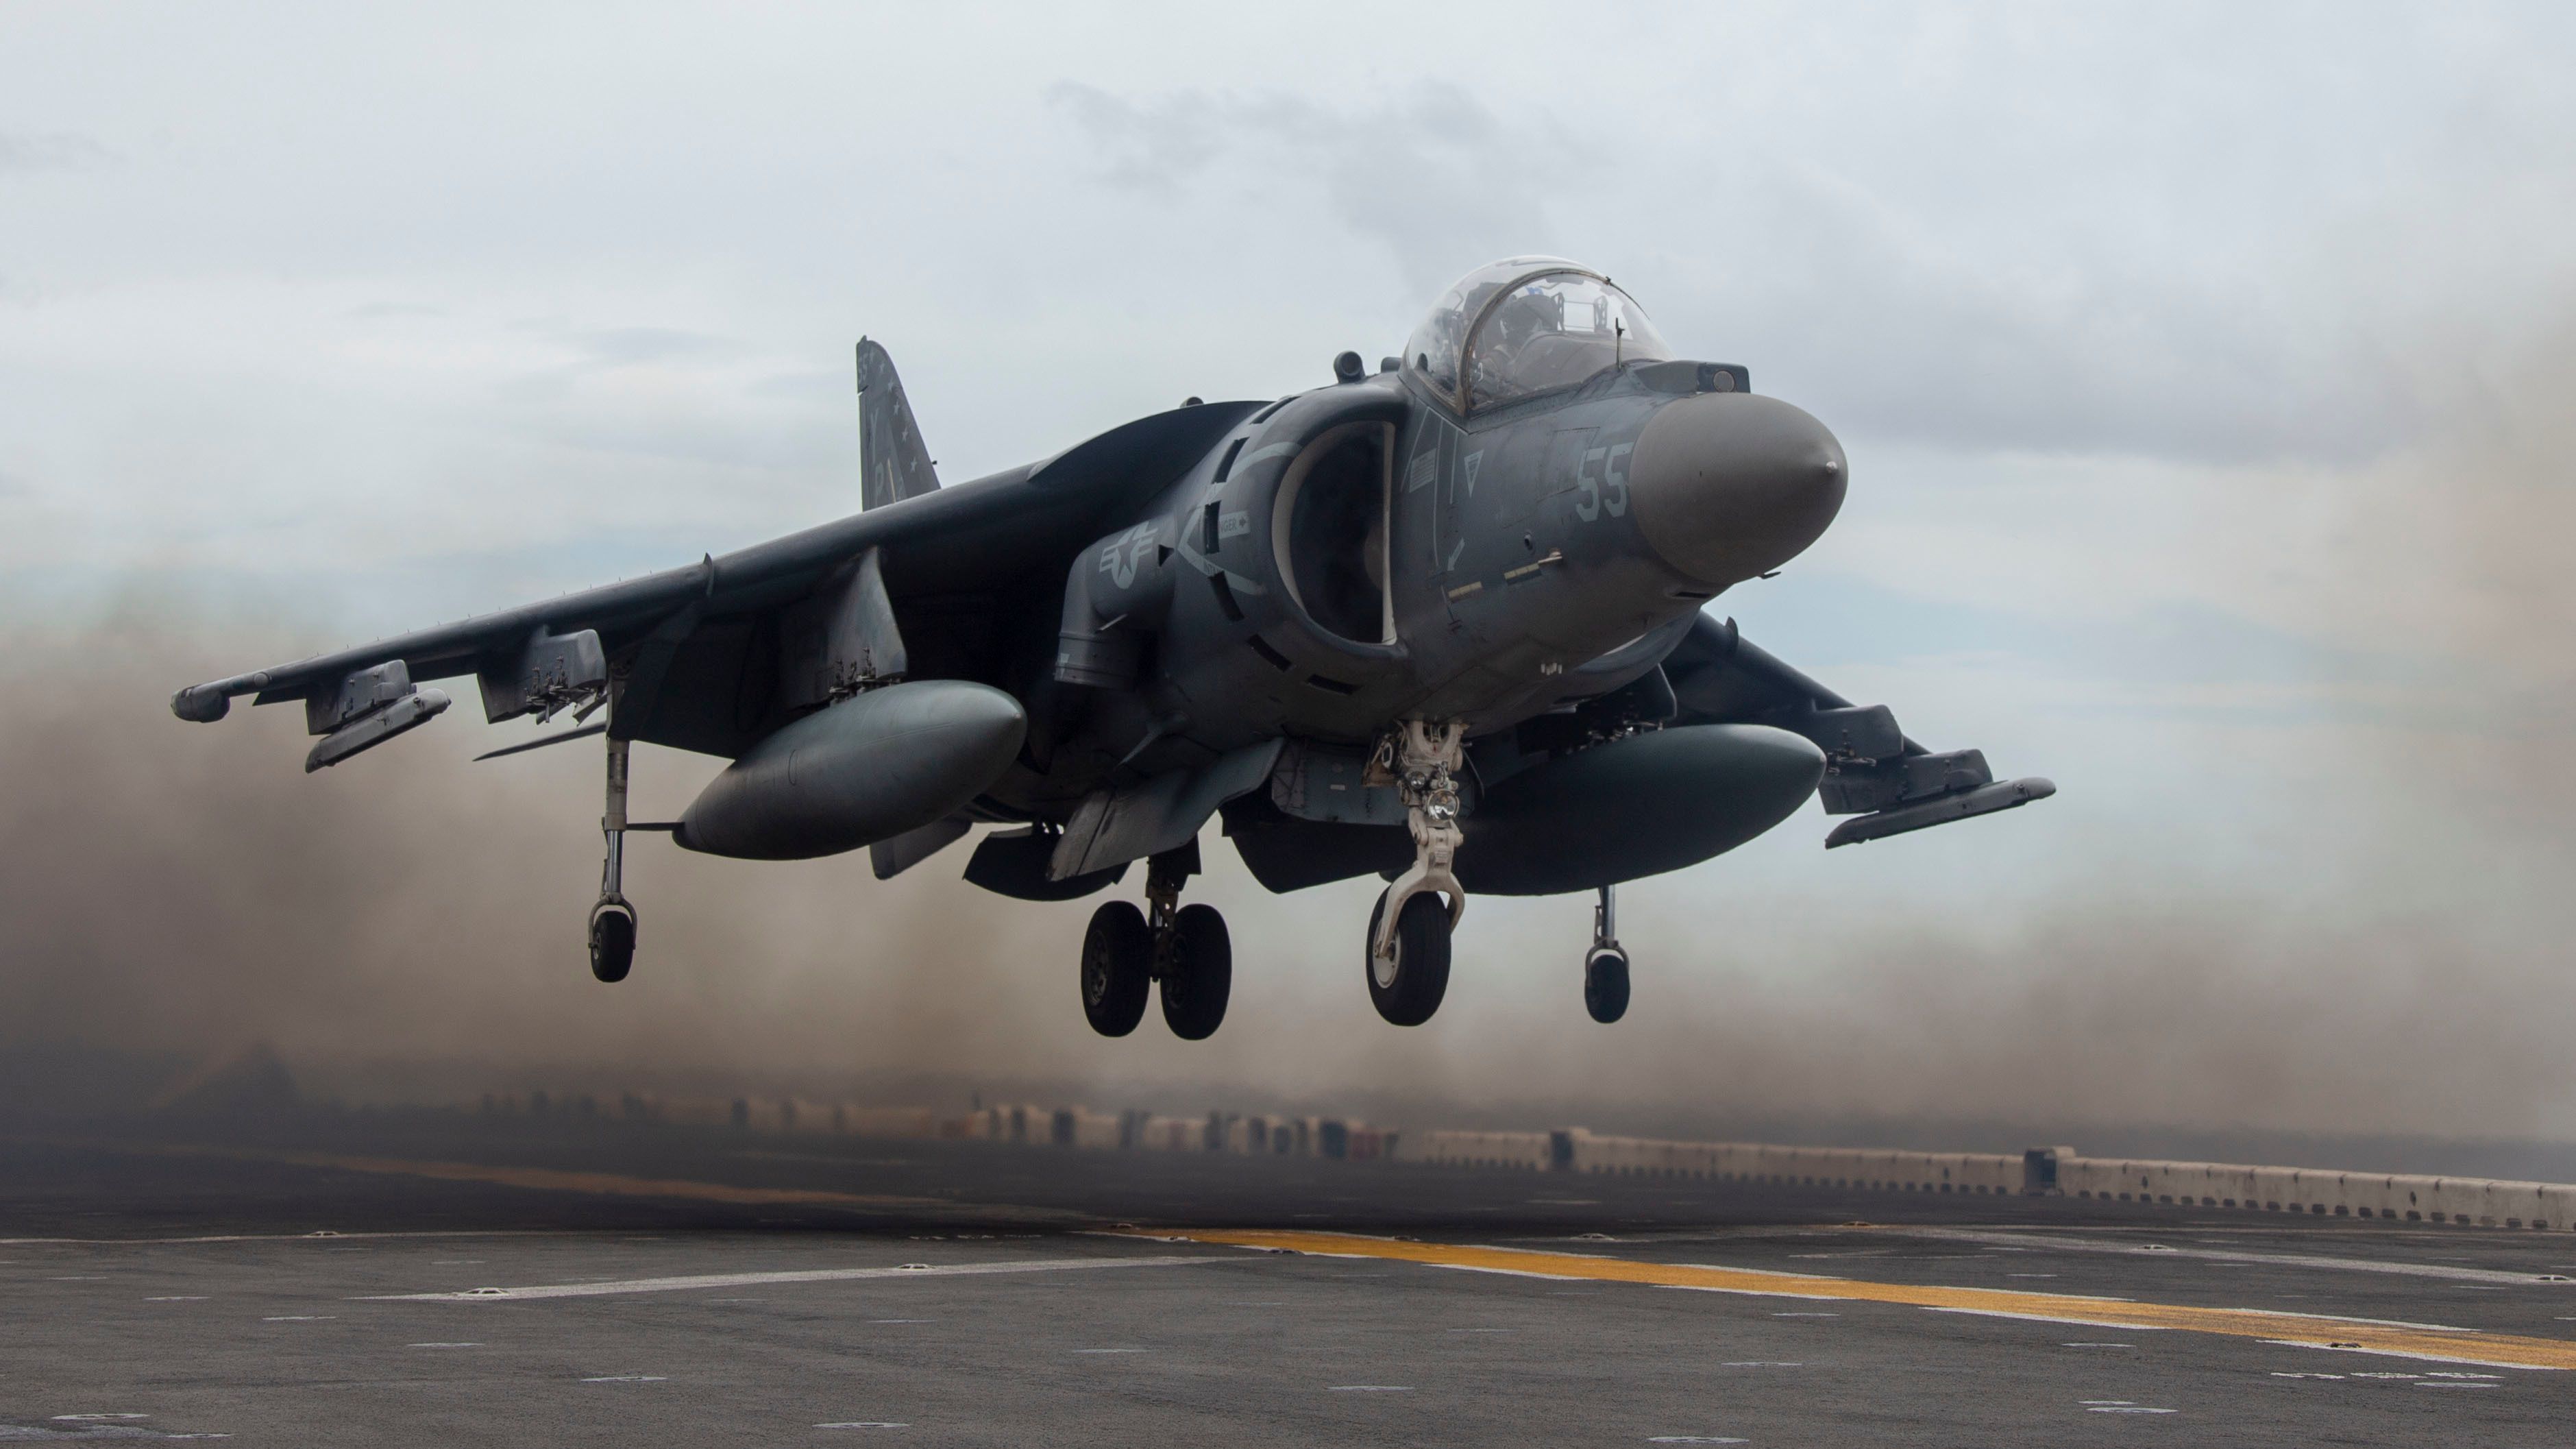 A Harrier jet floating just above the ground.